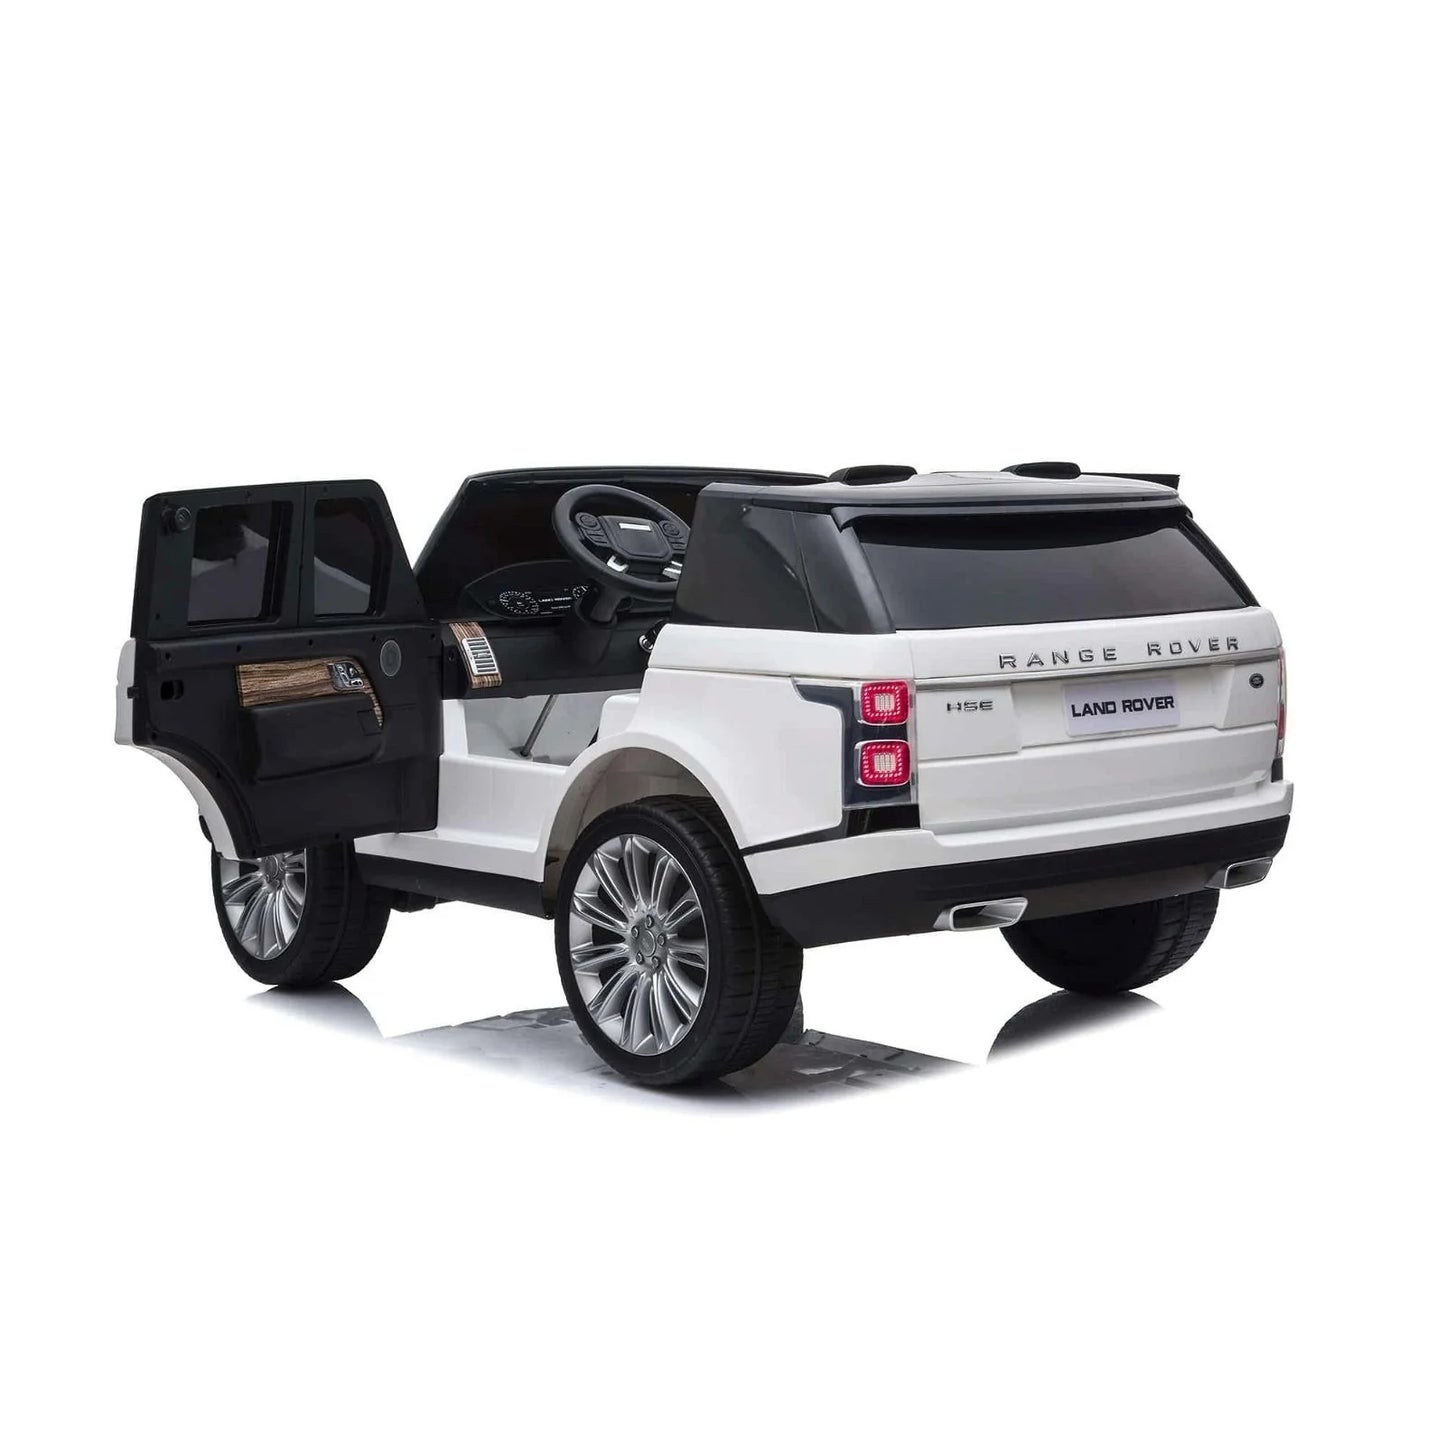 KIDS Ride on 24V ELECTRIC CAR RANGE ROVER WITH REMOTE CONTROL